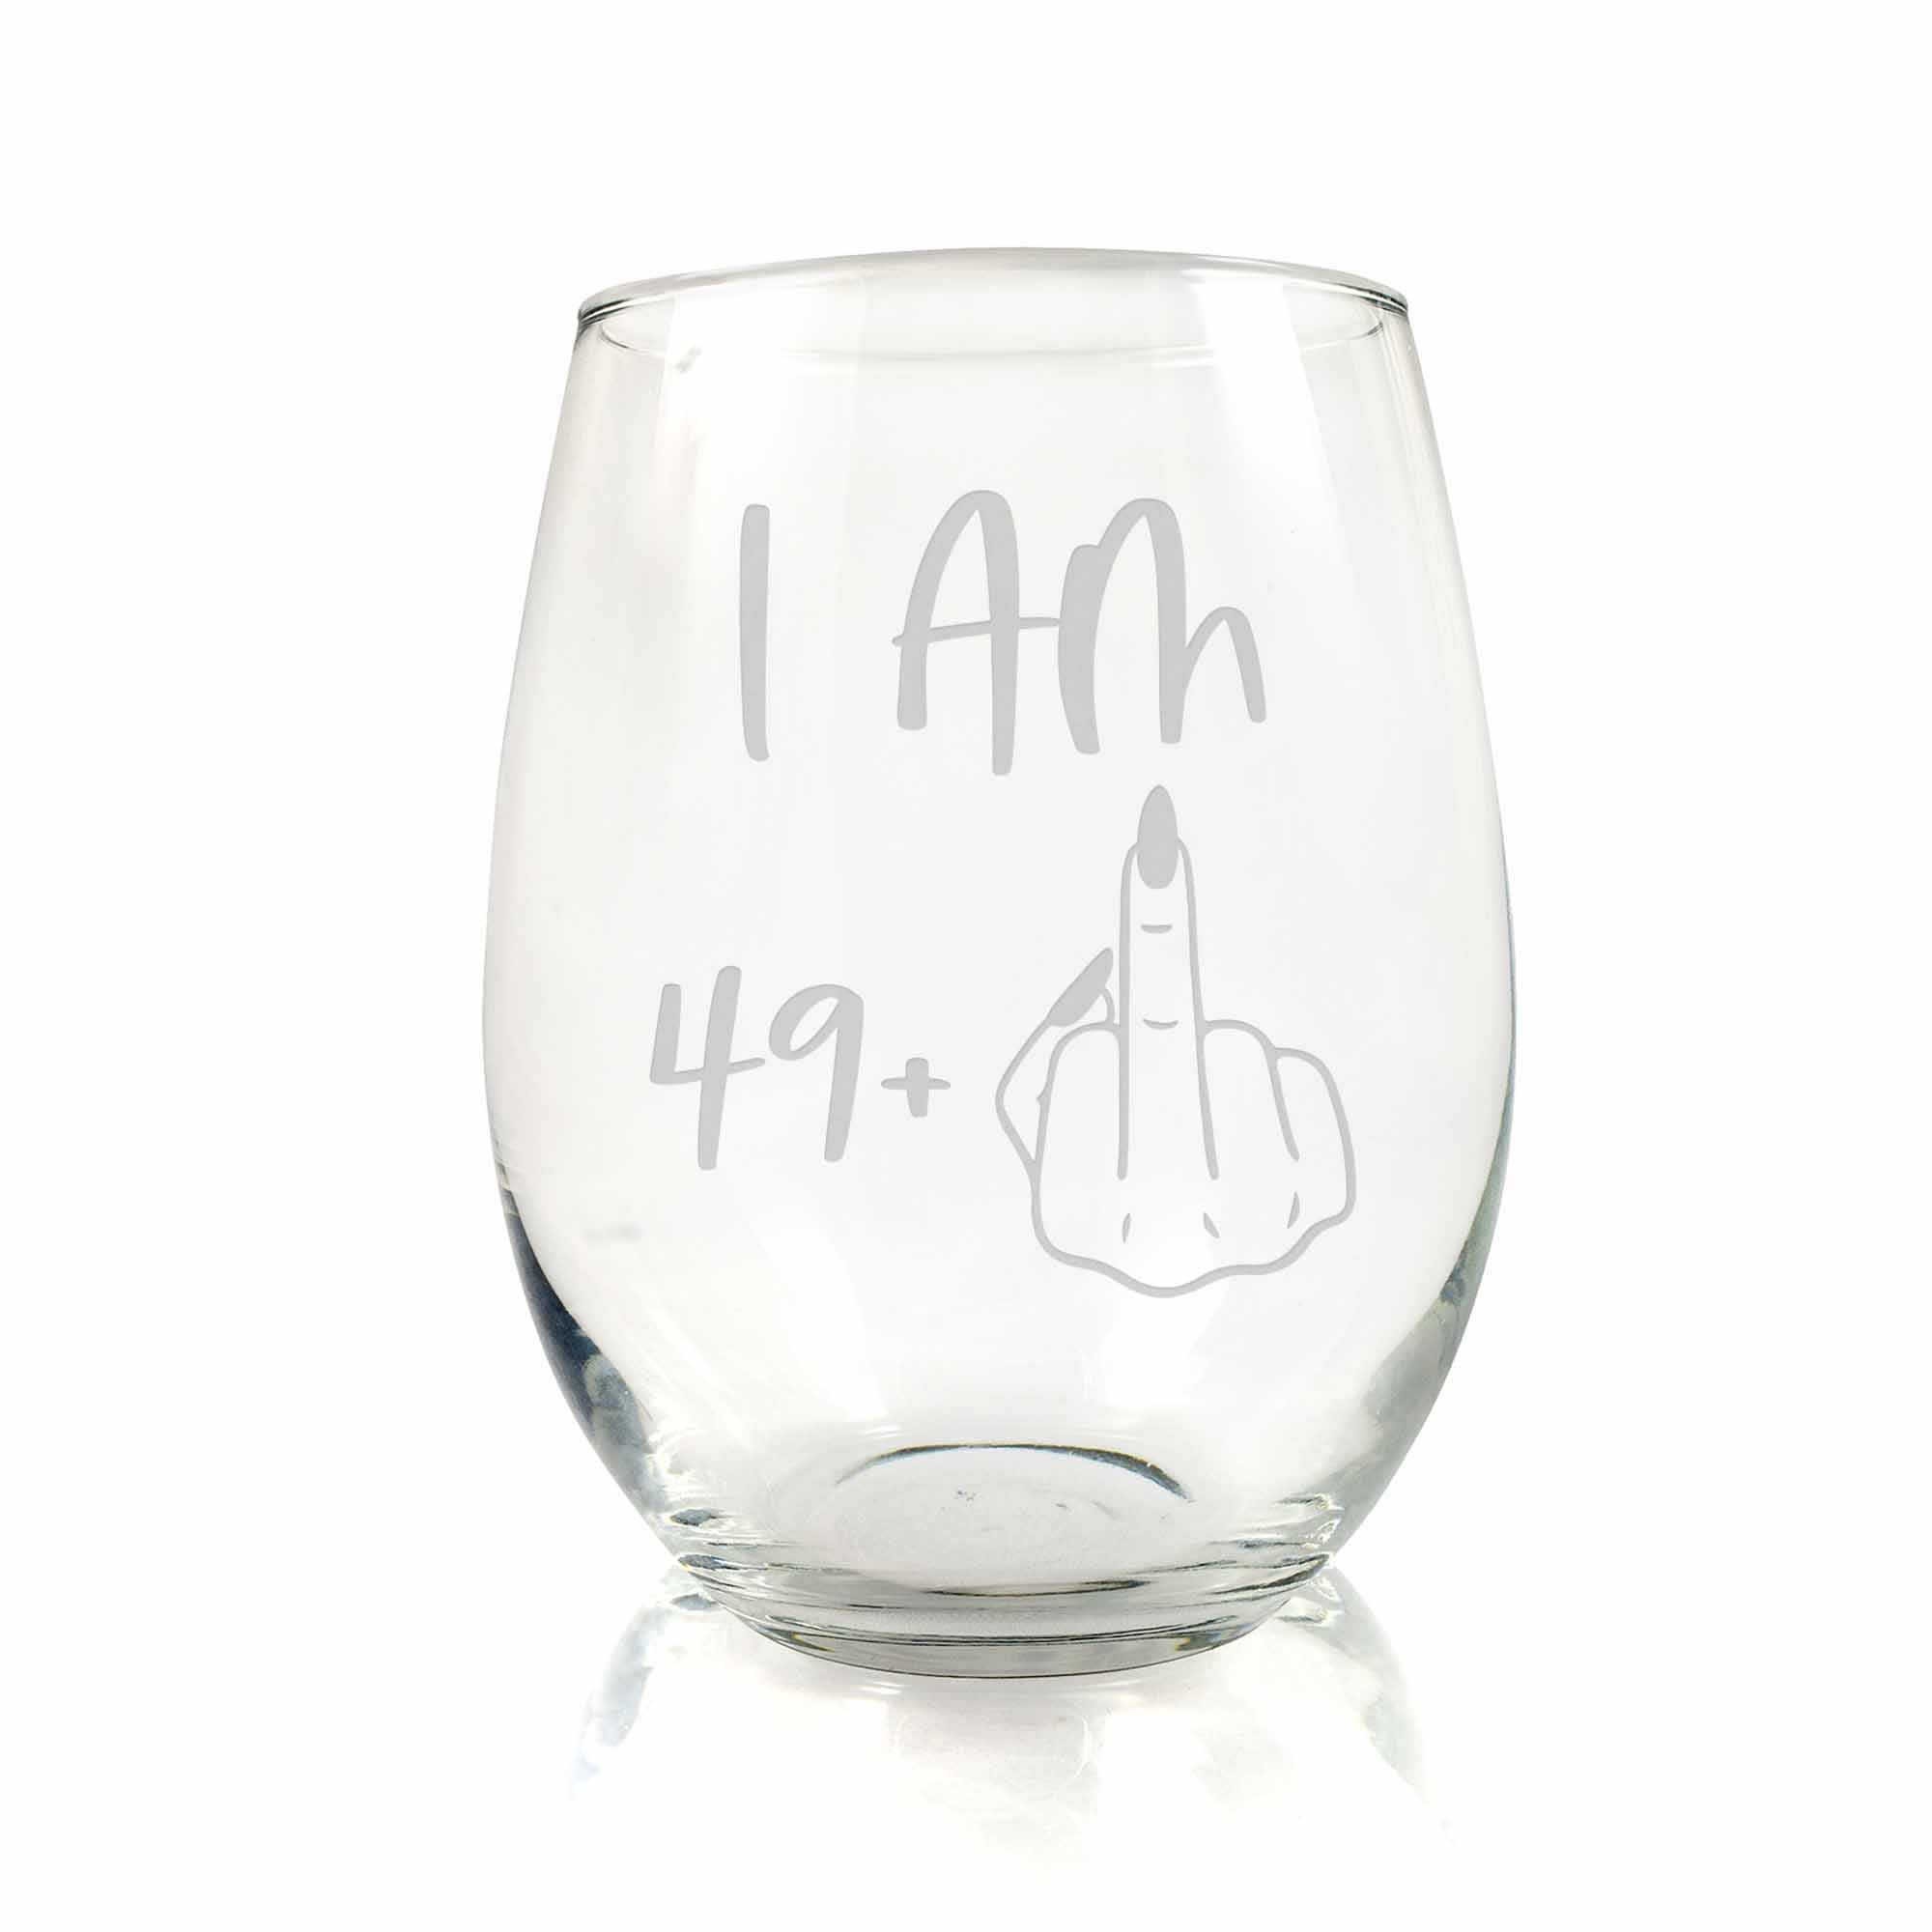 Engraved stemless wine glass – assorted wine sayings